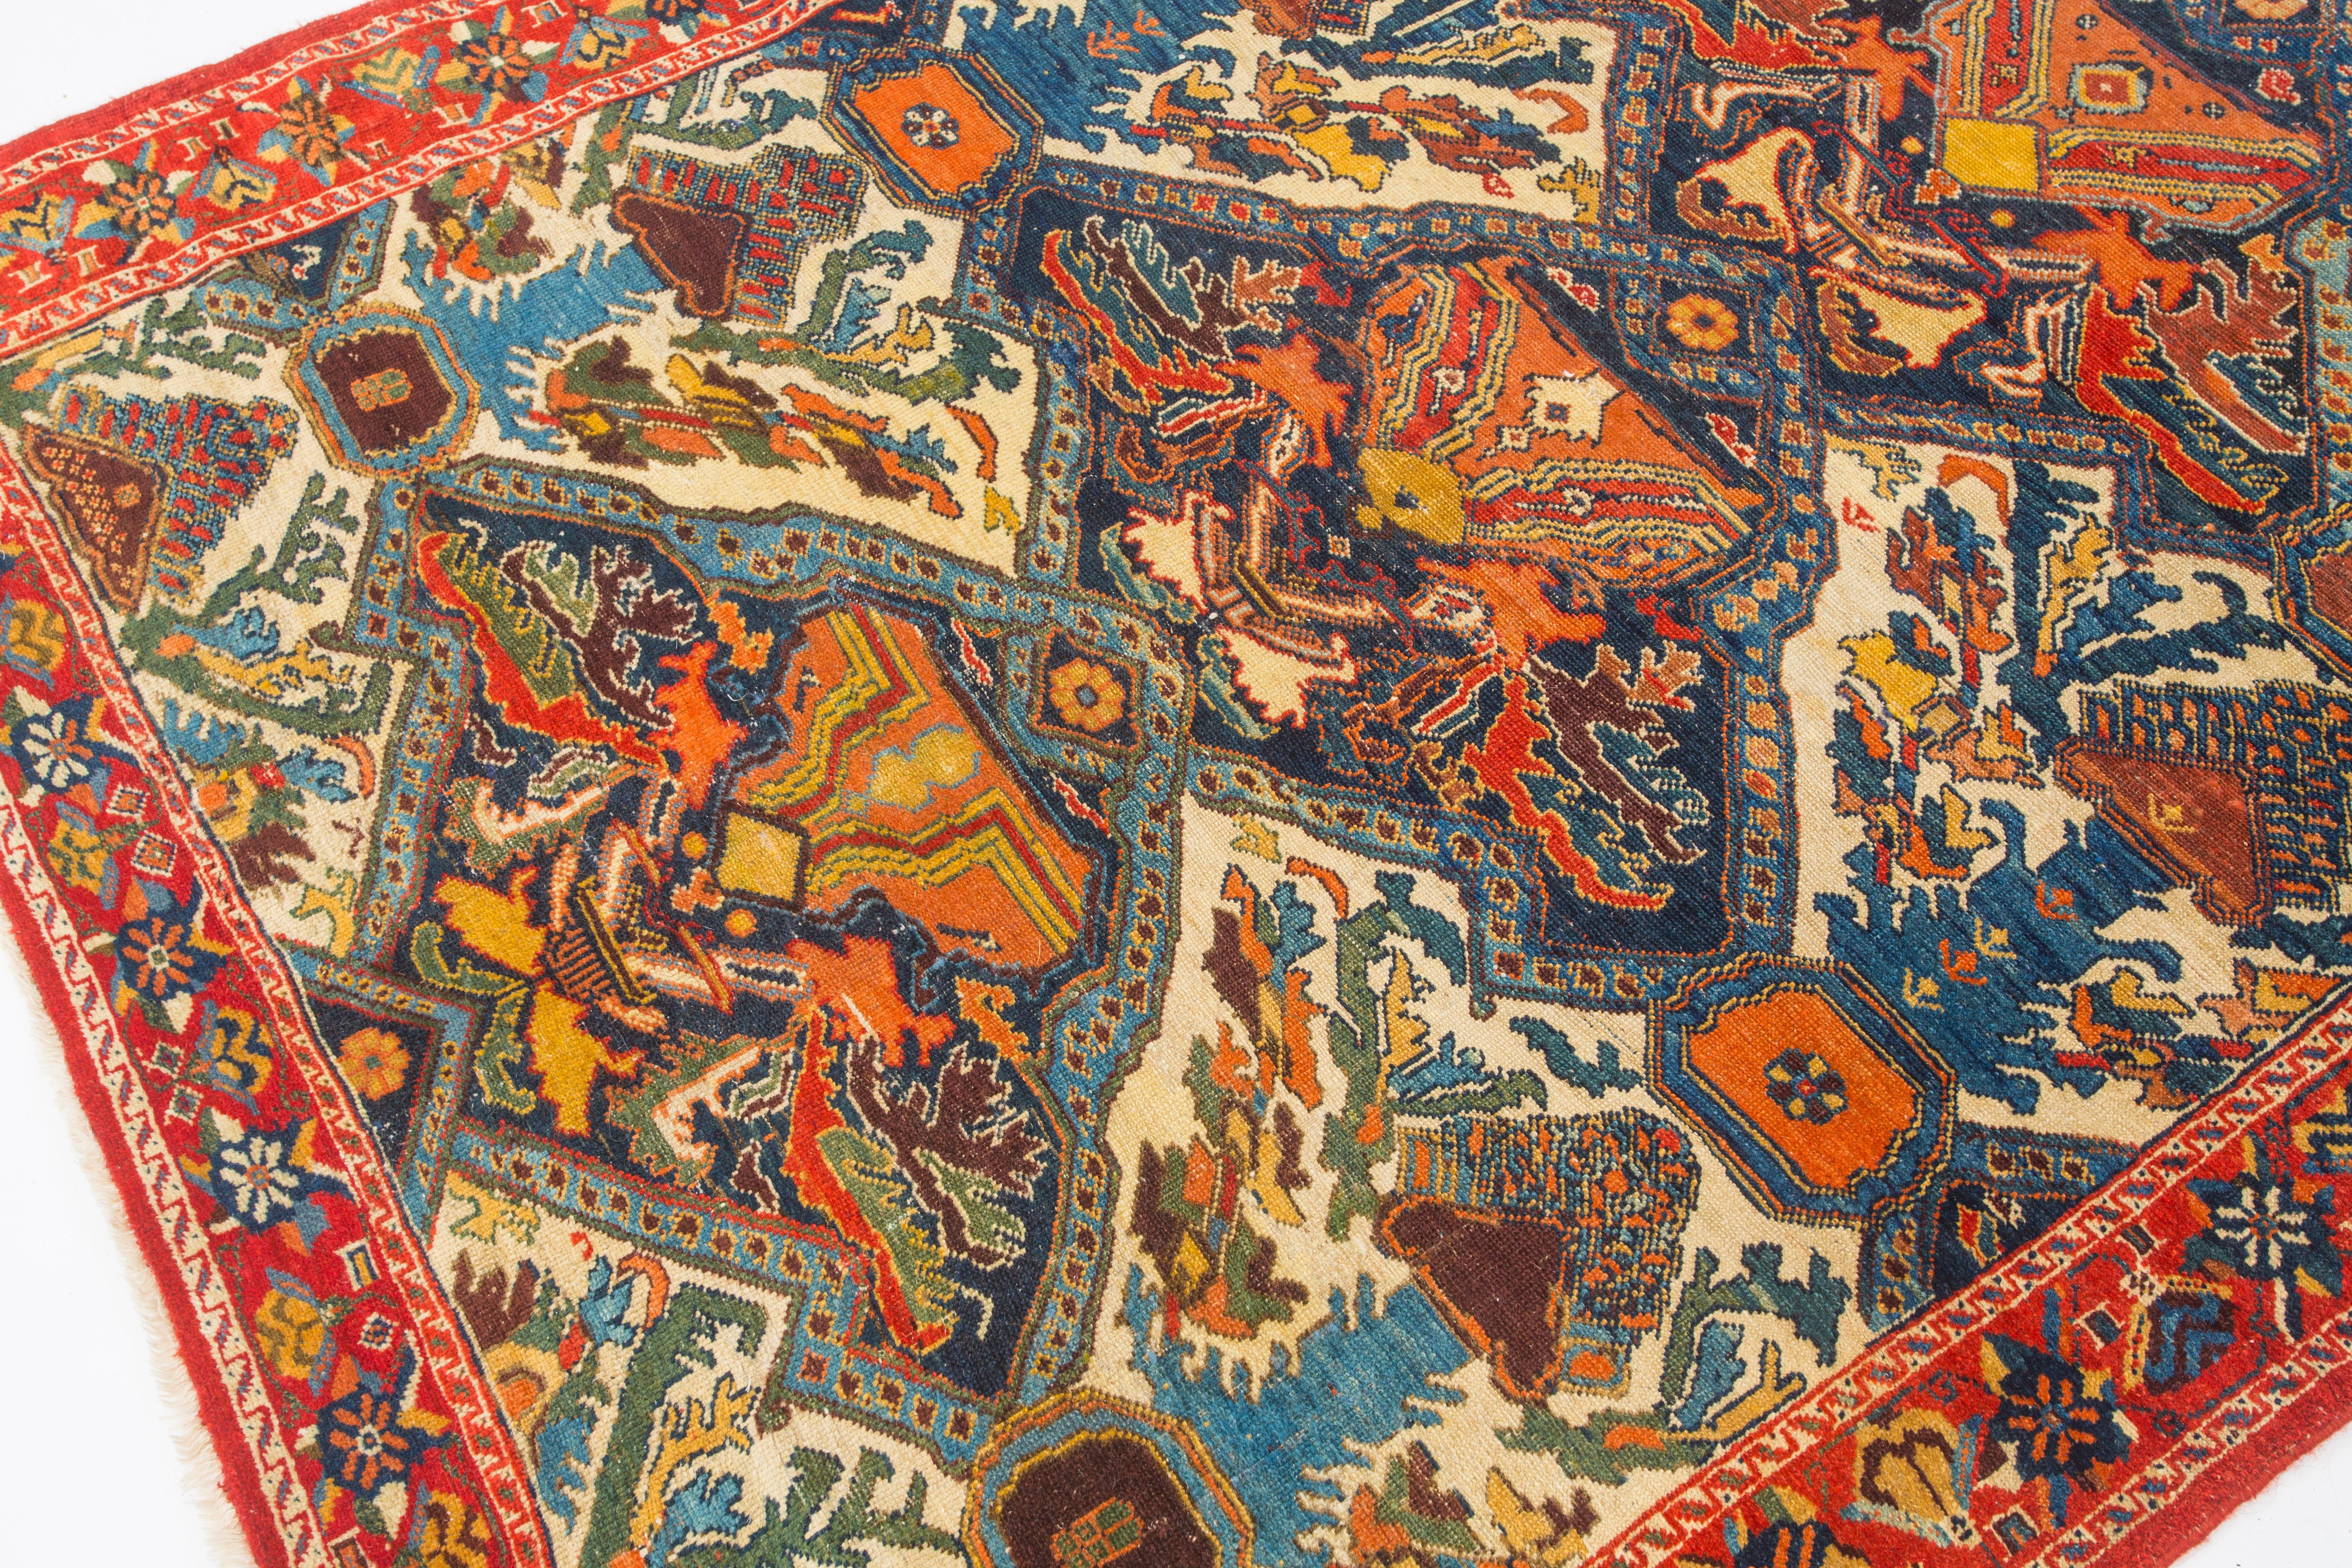 Astonishing 19th Century Rare Afshar Tribal rug  featured in famous book  For Sale 1